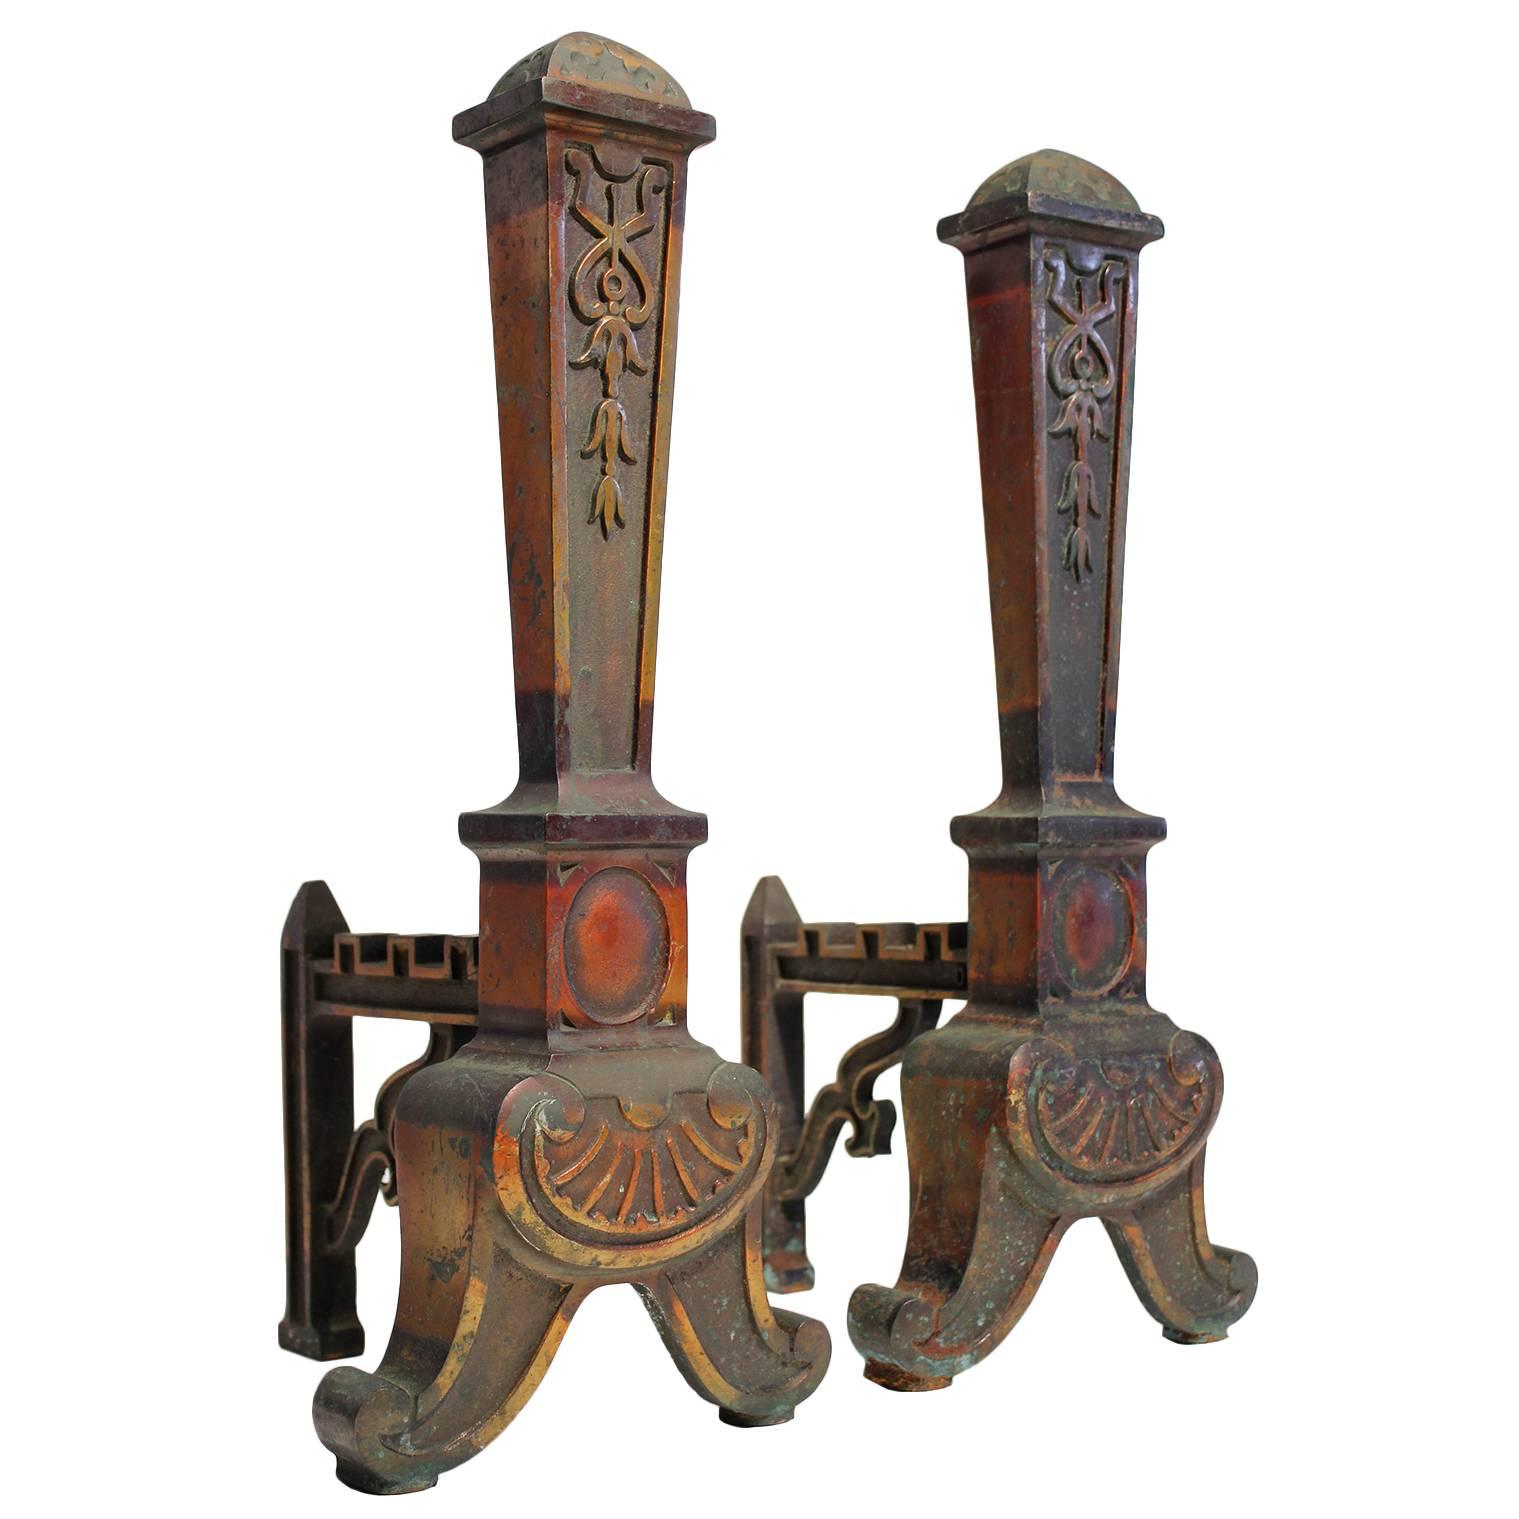 Antique Arts and Crafts Decorative Brass Andirons For Sale